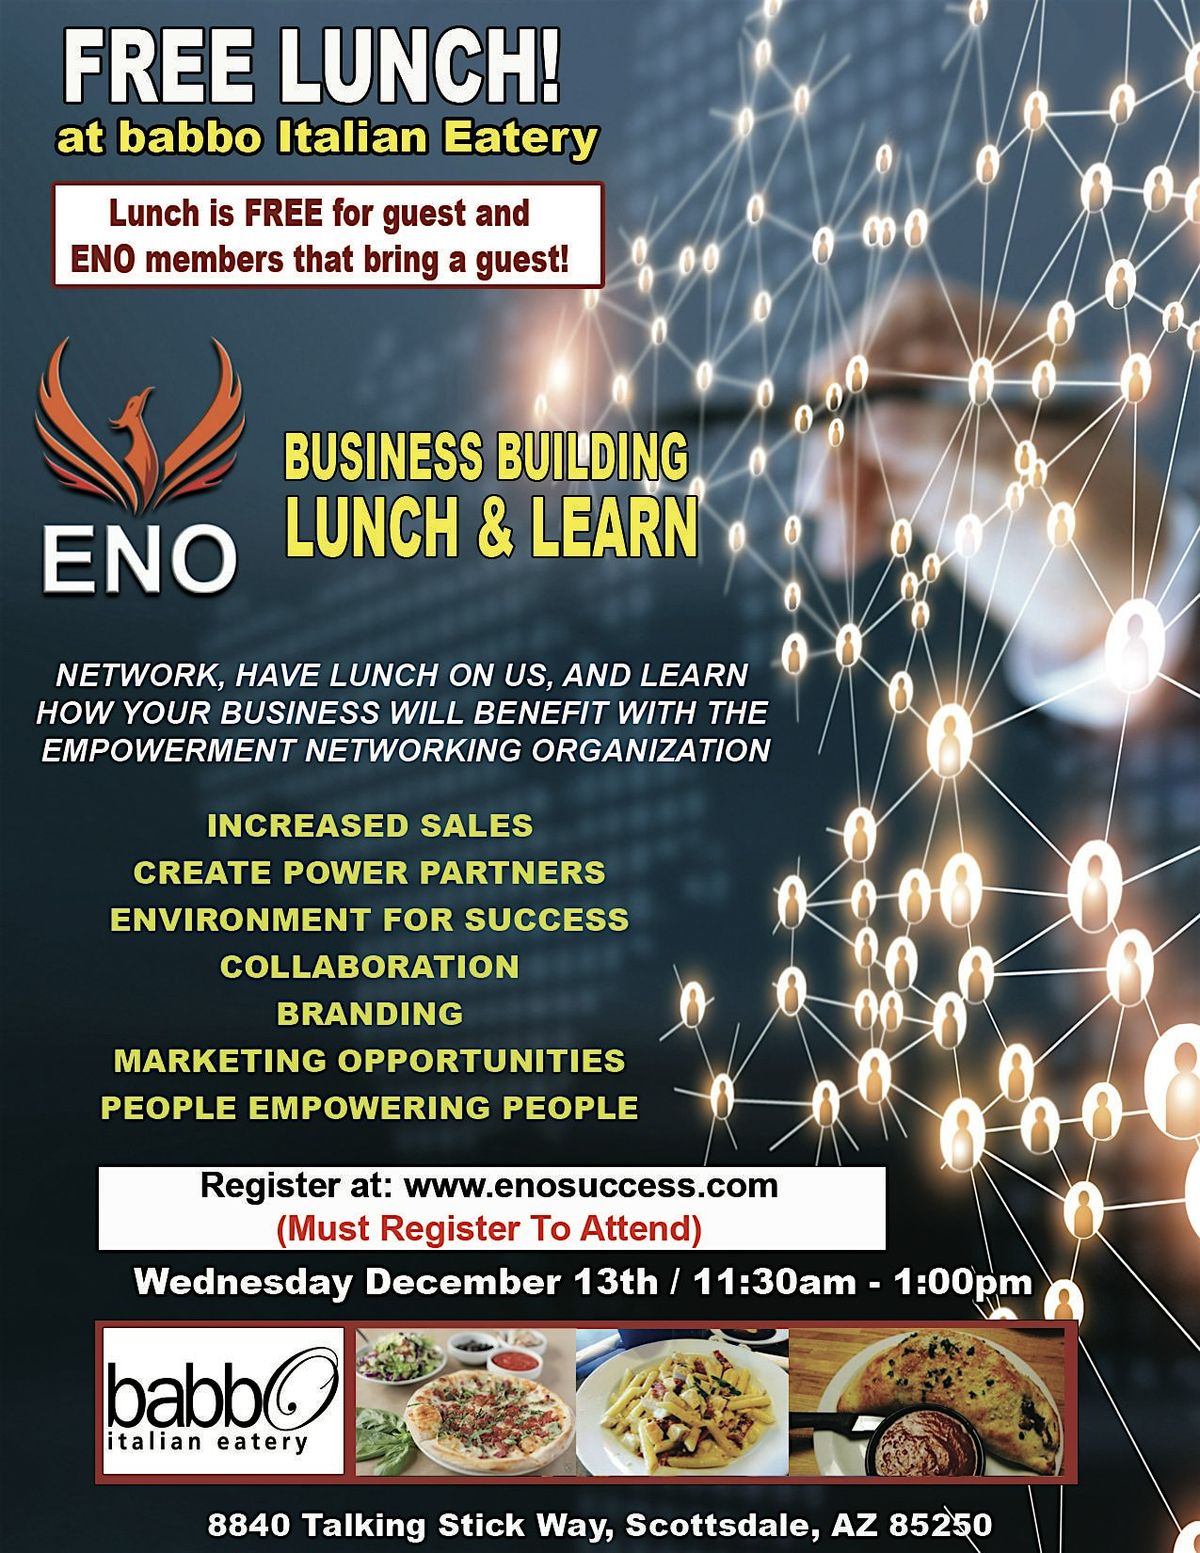 FREE LUNCH - ENO Business Building Lunch And Learn